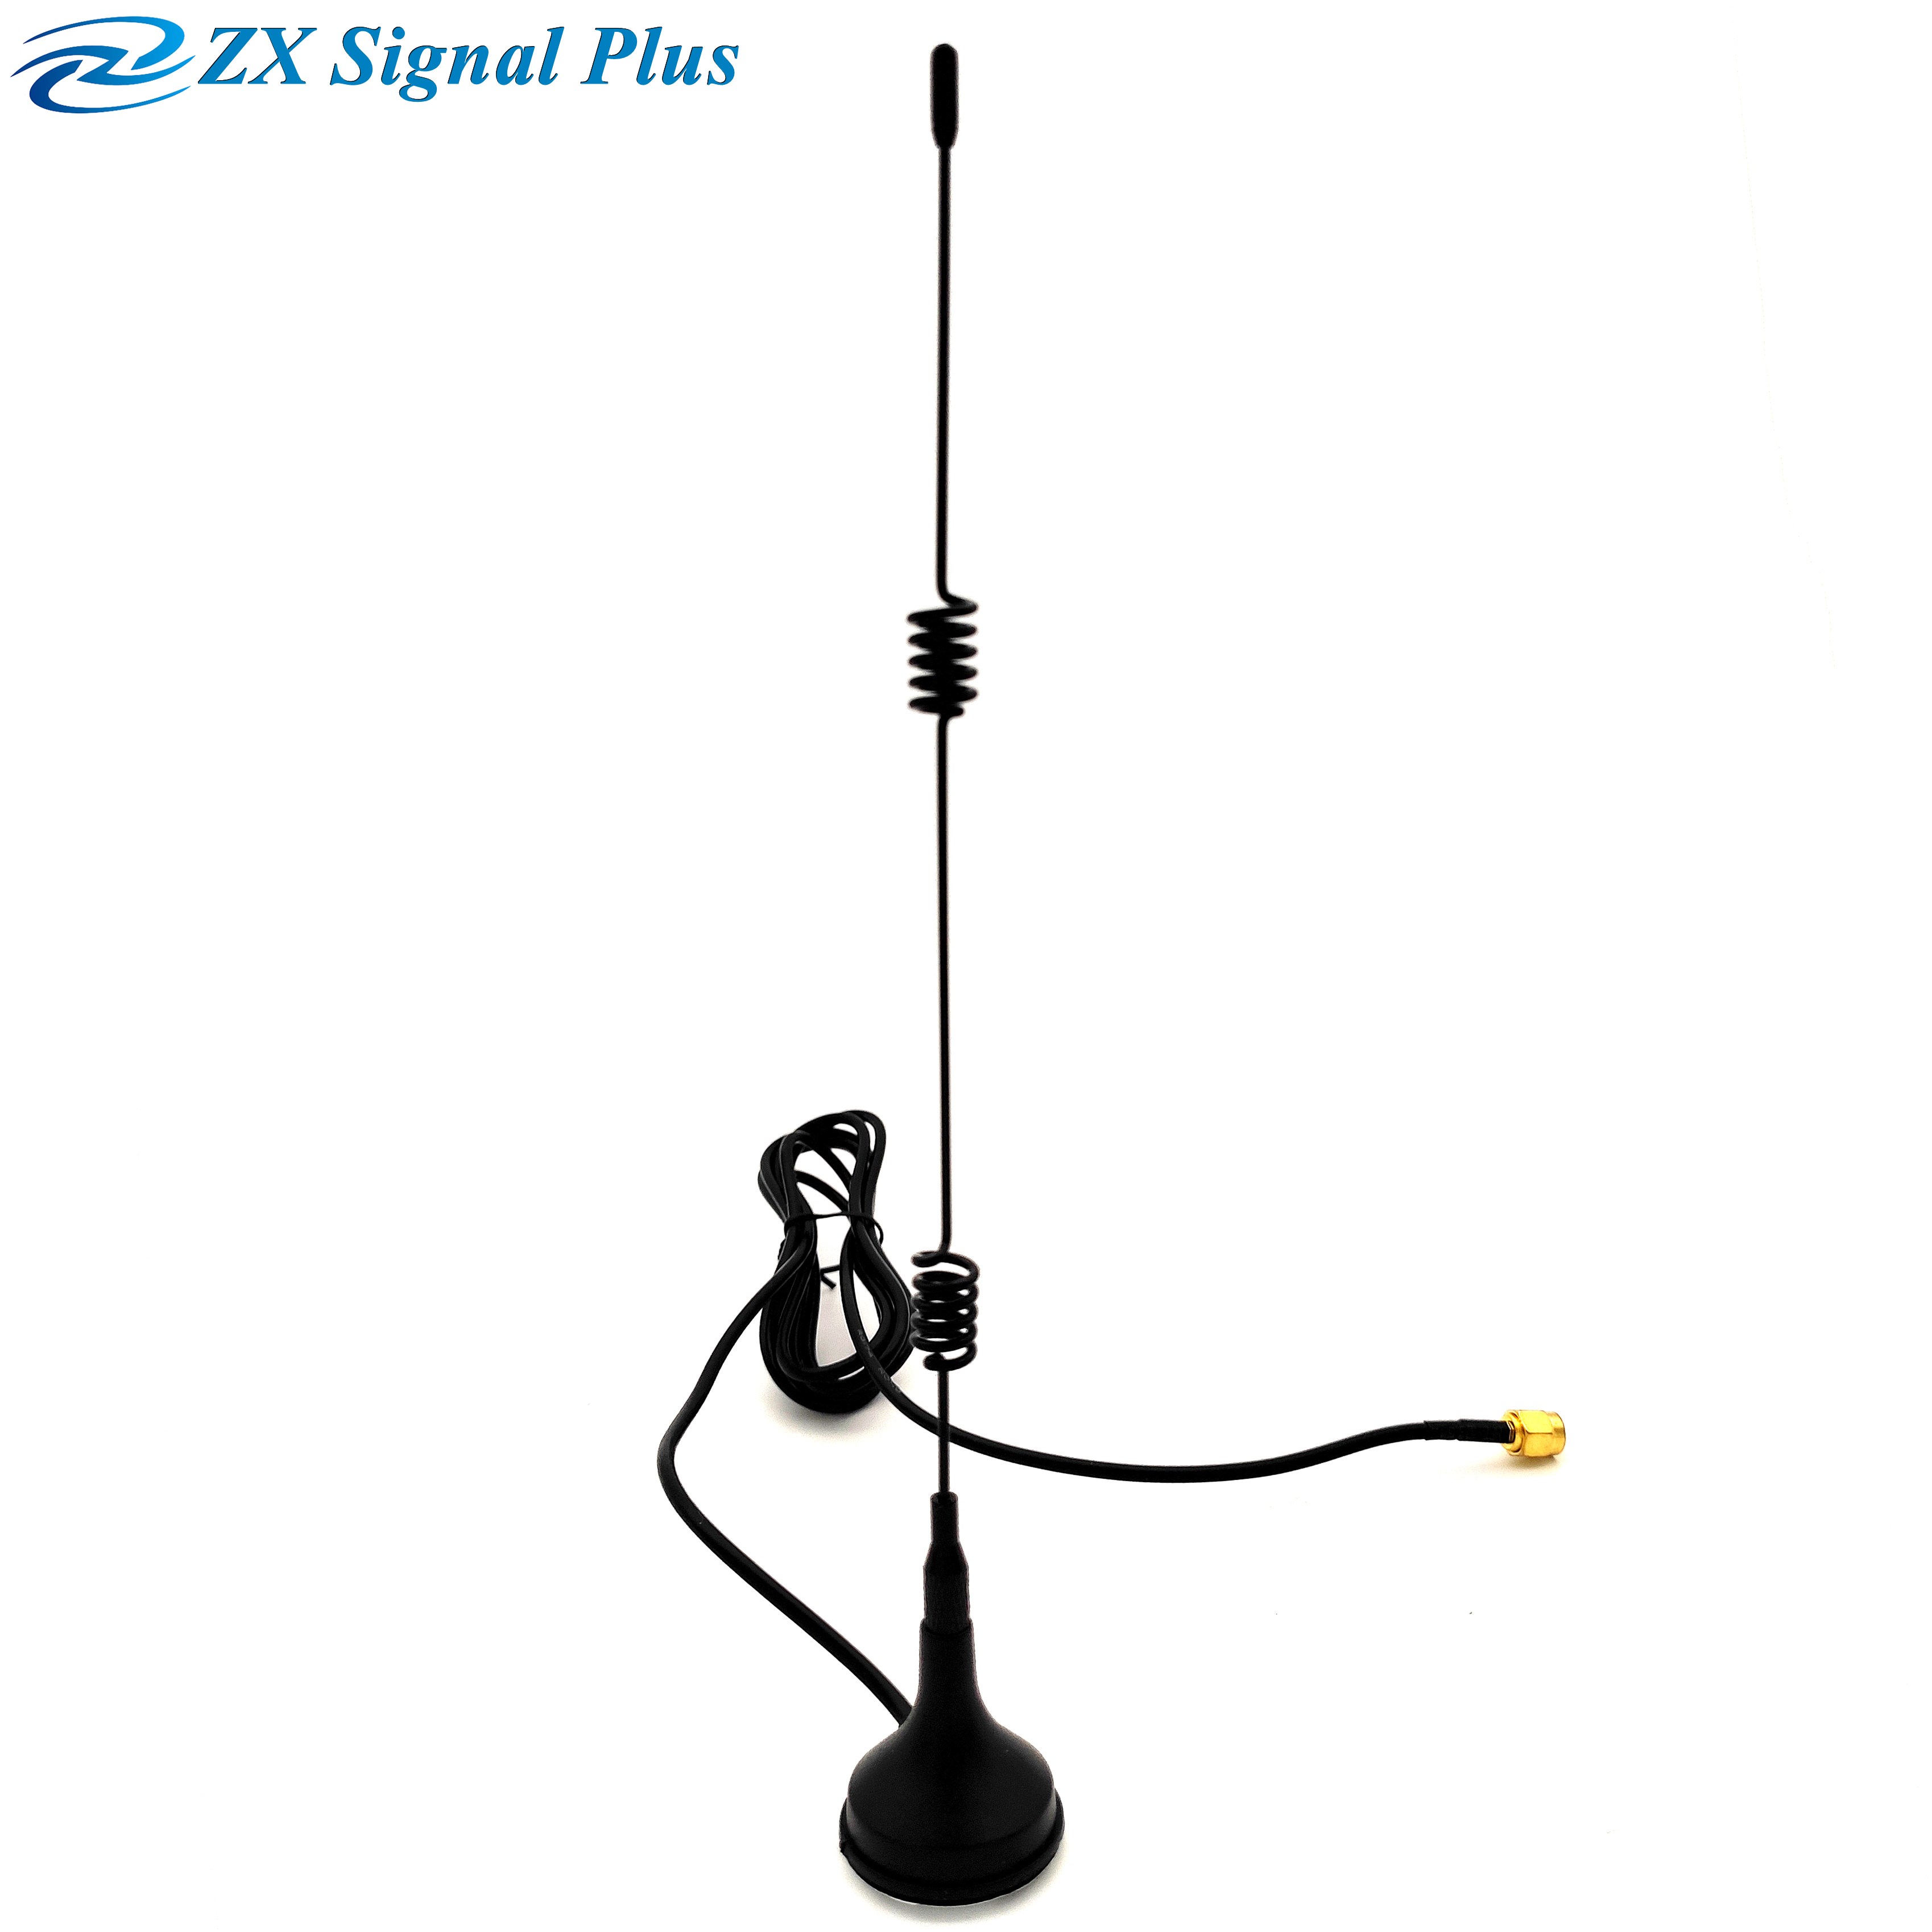 pcb wifi antenna Manufacturer, pcb wifi antenna For Sale - Signal Plus